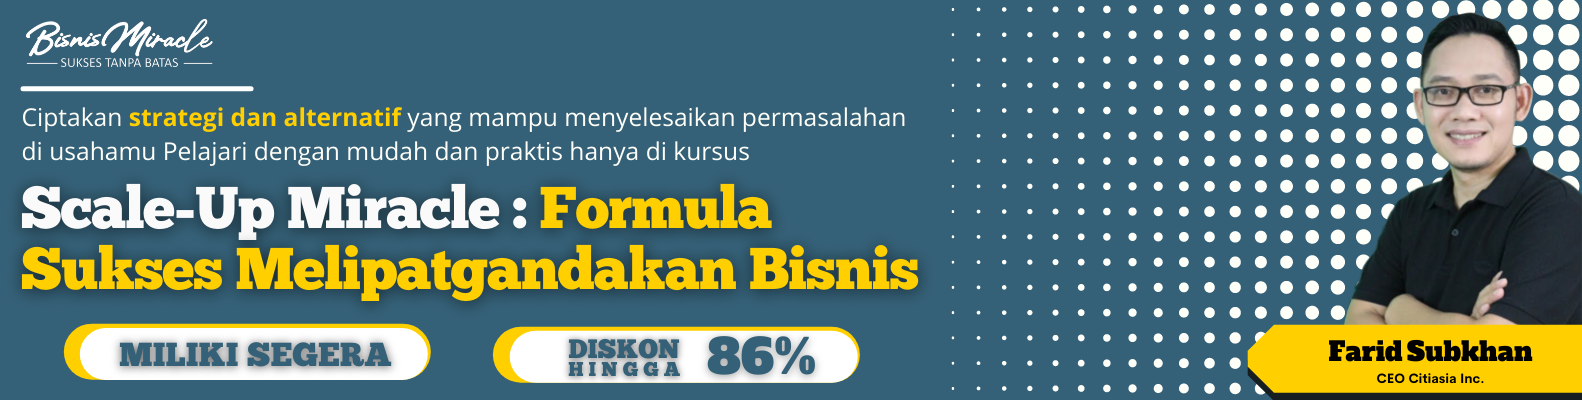 scale up bisnis